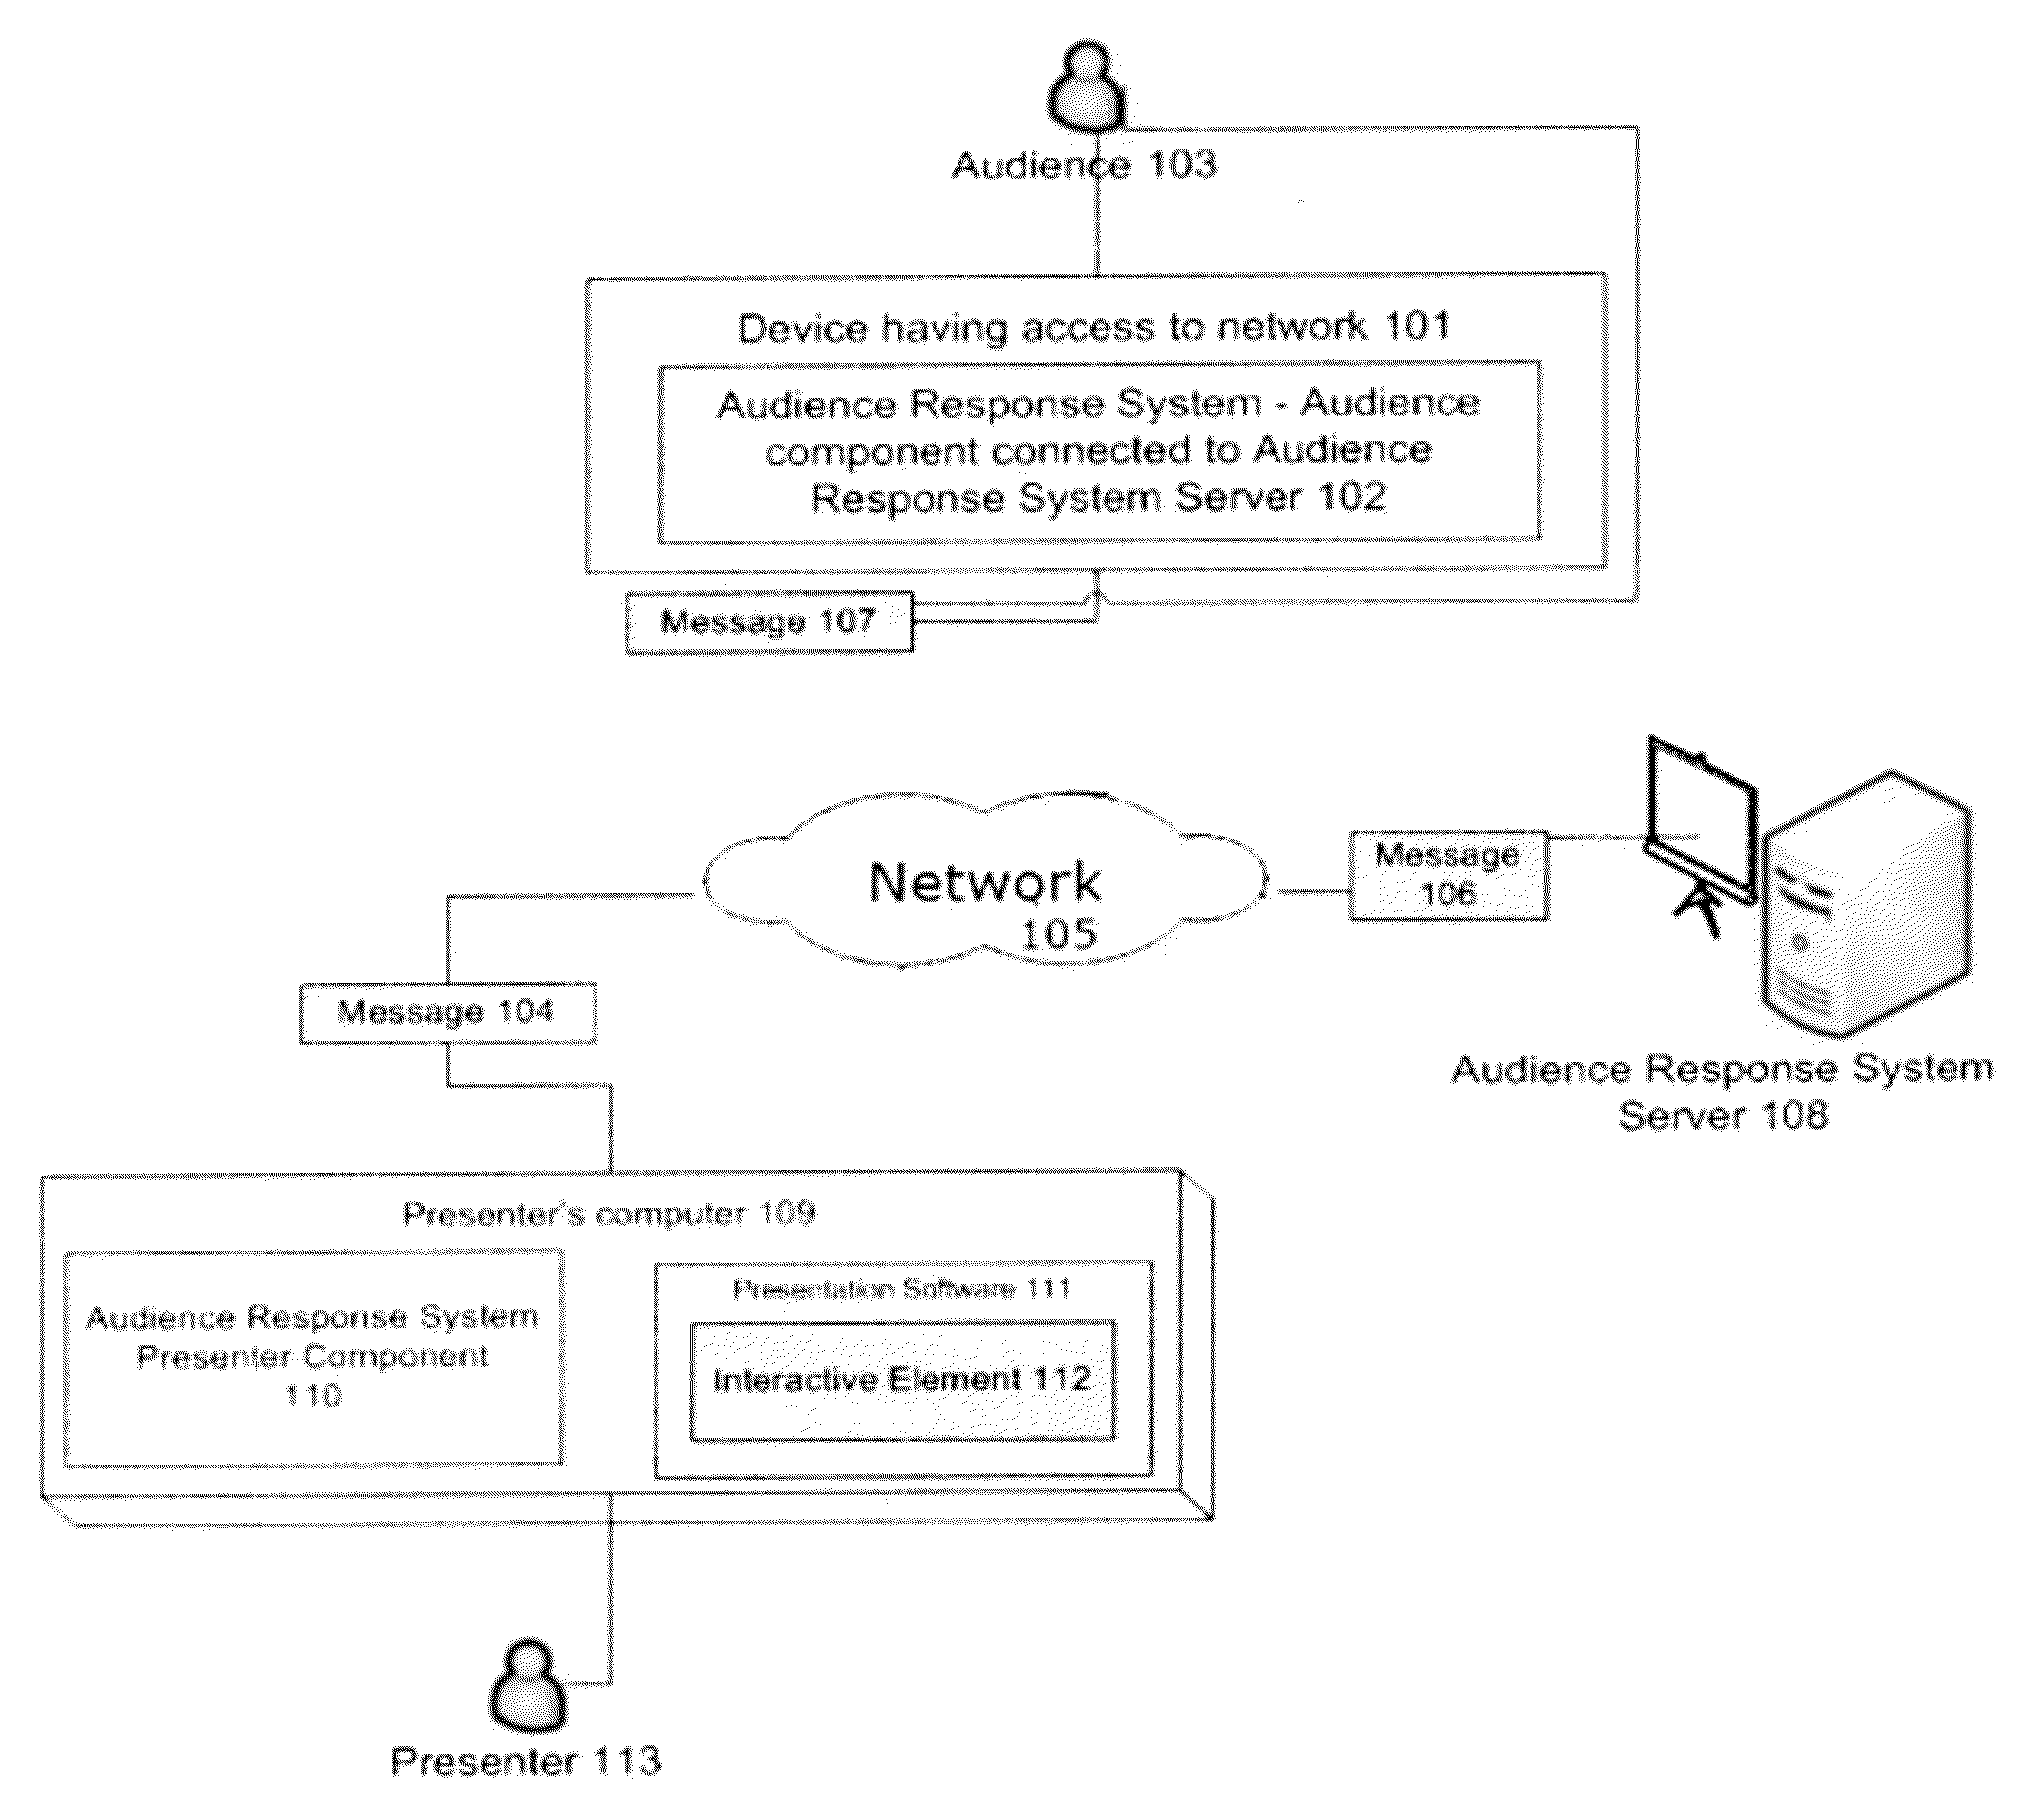 Method and system to use audience participation system within a presentation software